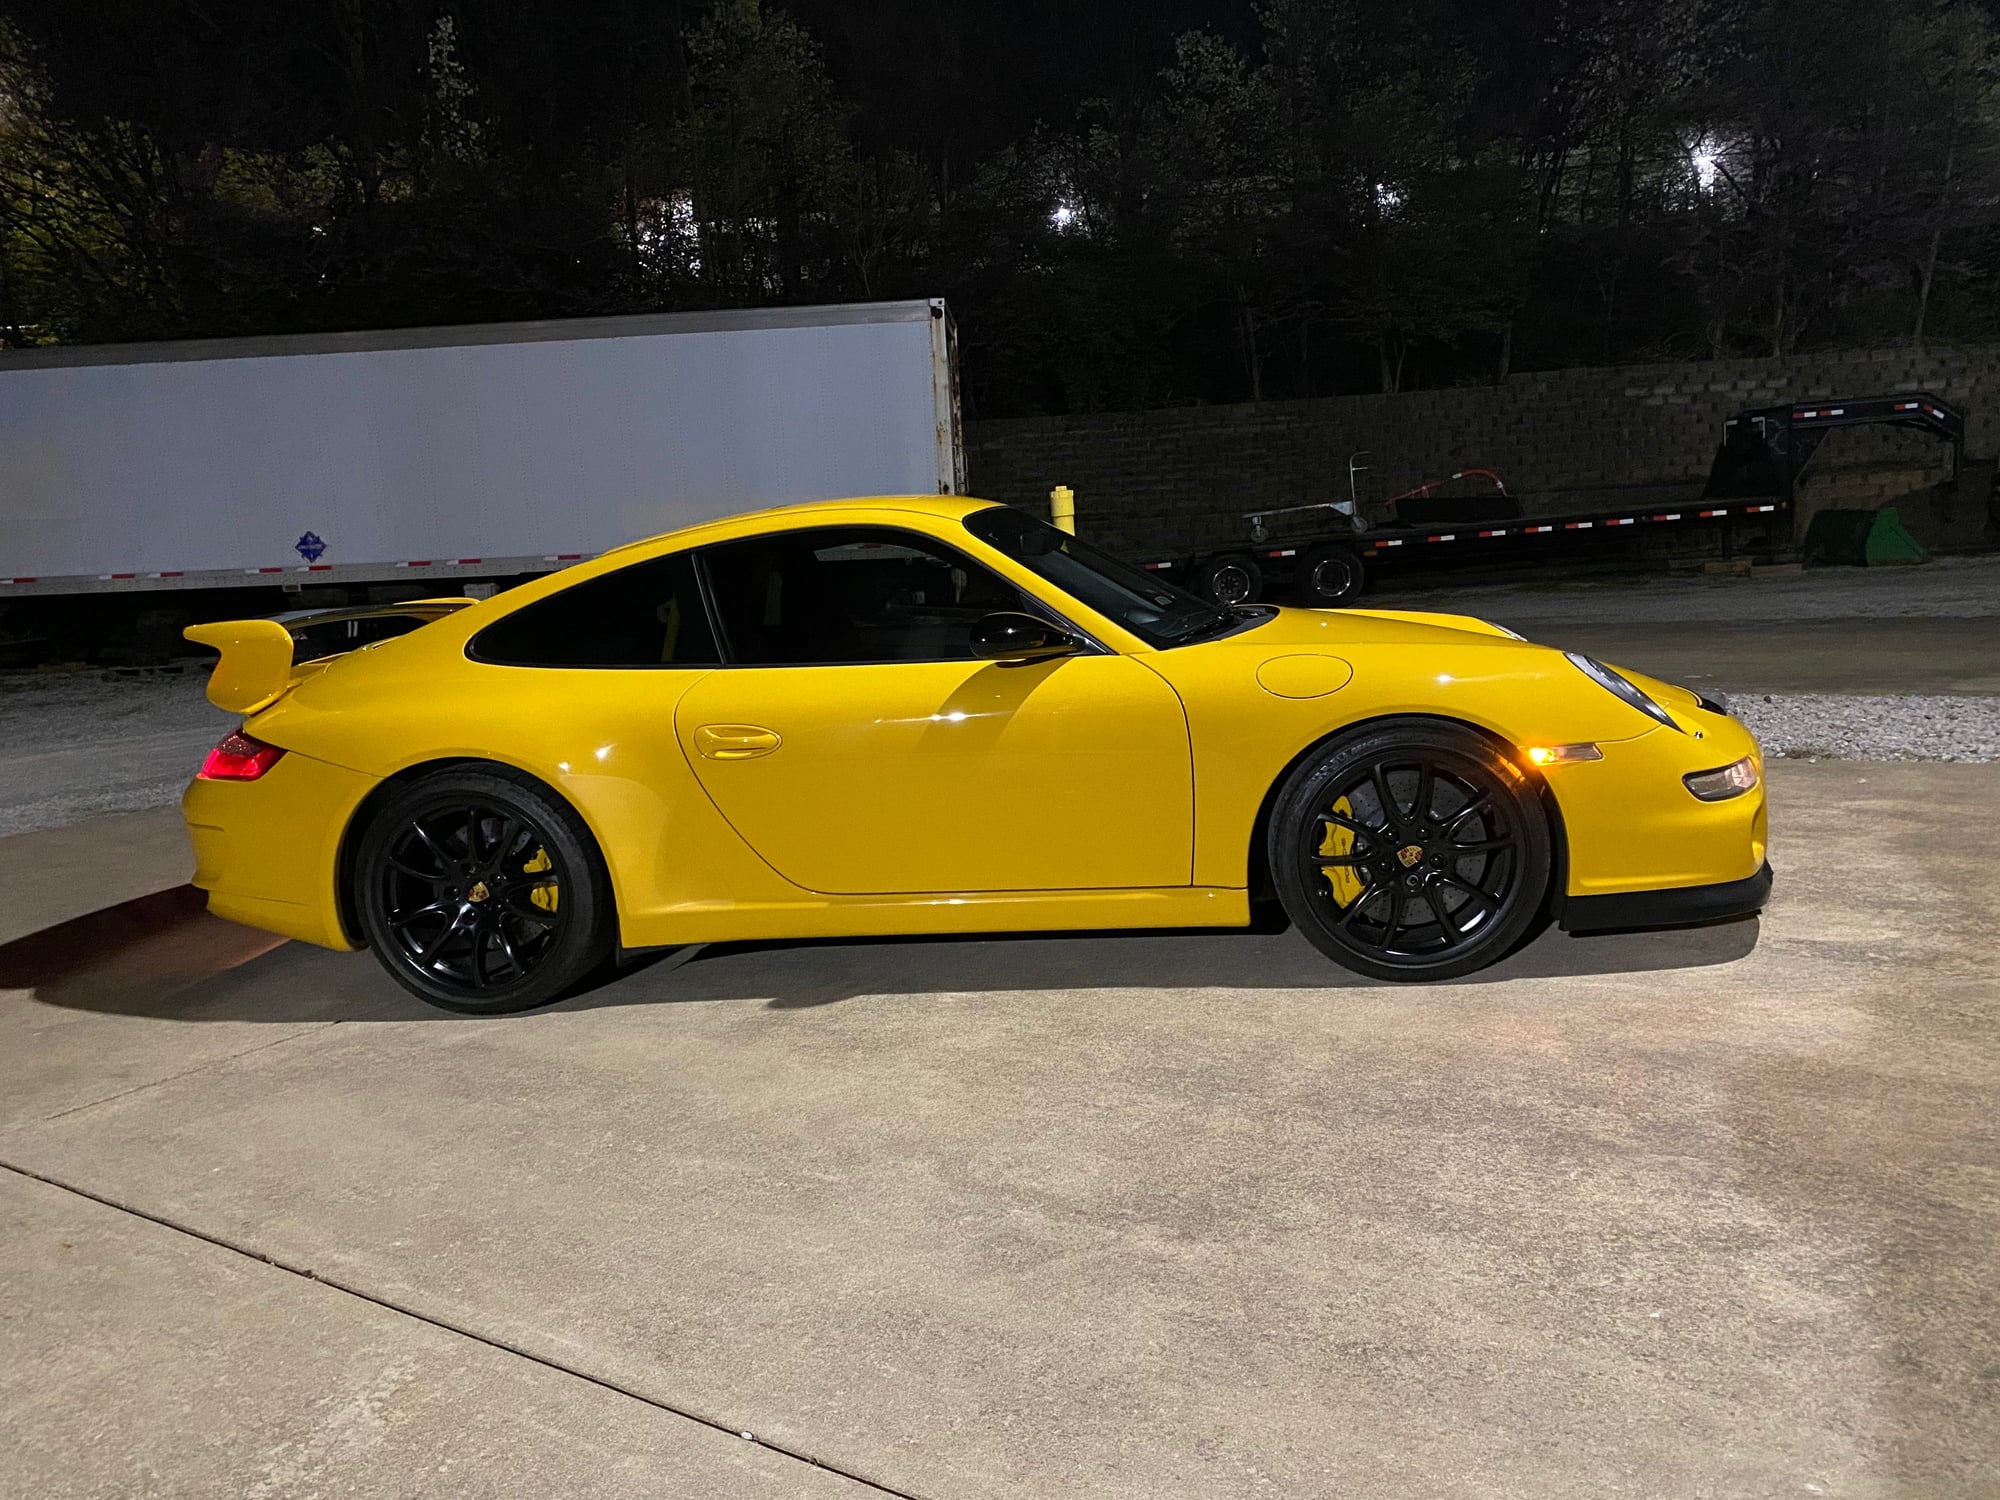 2007 Porsche 911 - Speed yellow 997.1 GT3 - Used - VIN WP0AC29967S793098 - 22,000 Miles - 6 cyl - 4WD - Manual - Coupe - Yellow - Louisville, KY 40299, United States